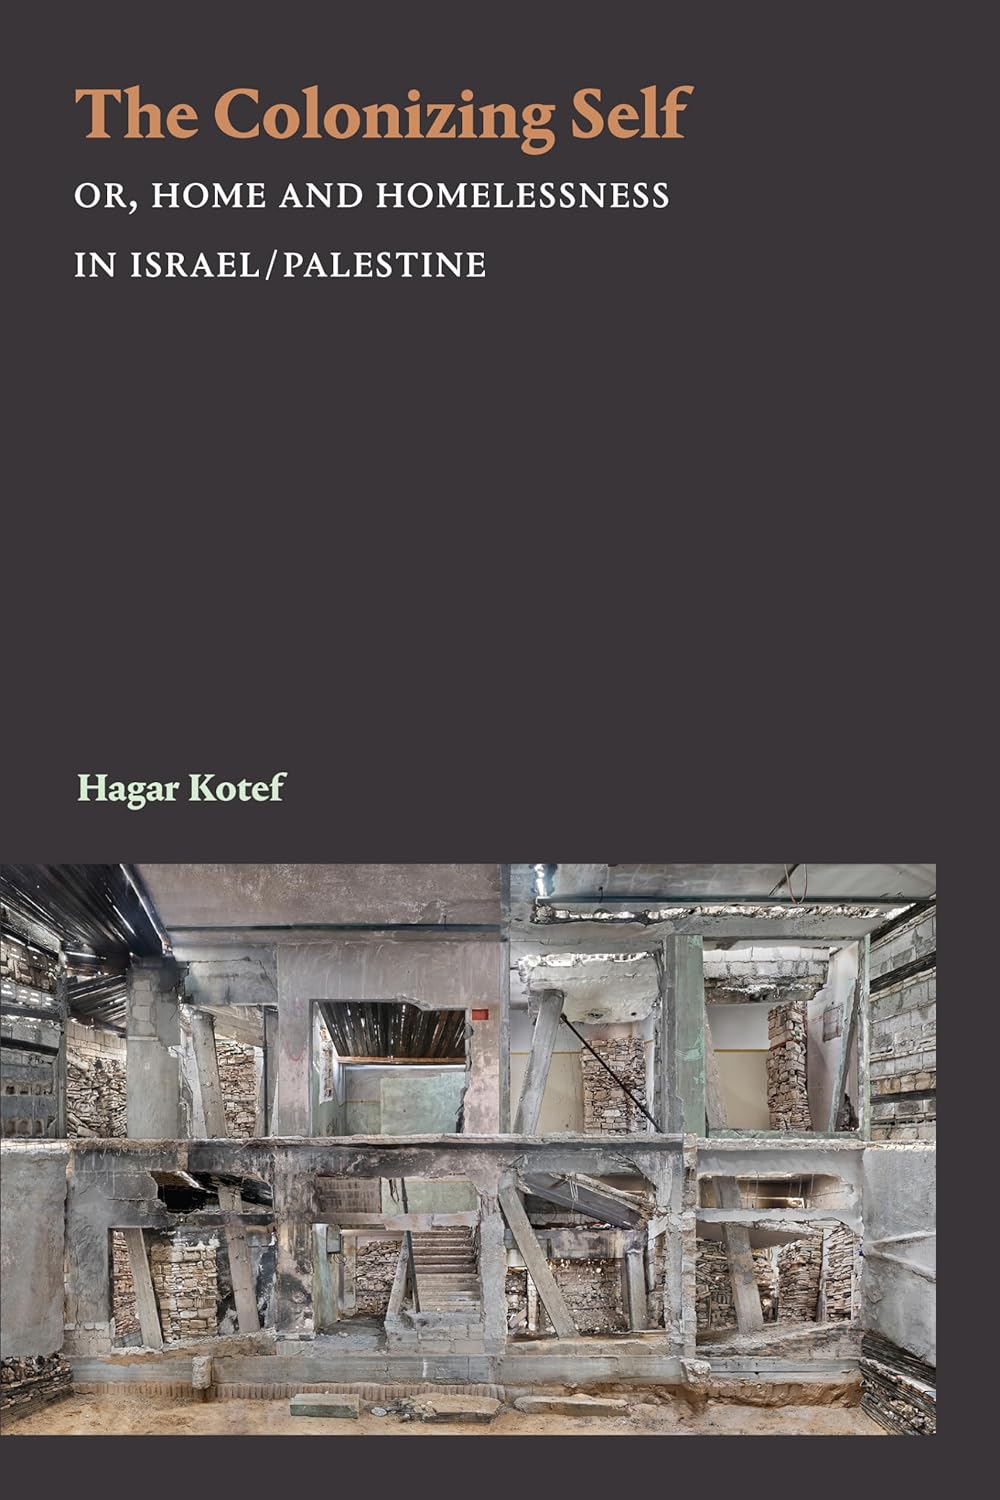 The Colonizing Self: Or, Home and Homelessness in Israel/Palestine (Theory in Forms) by Hagar Kotef